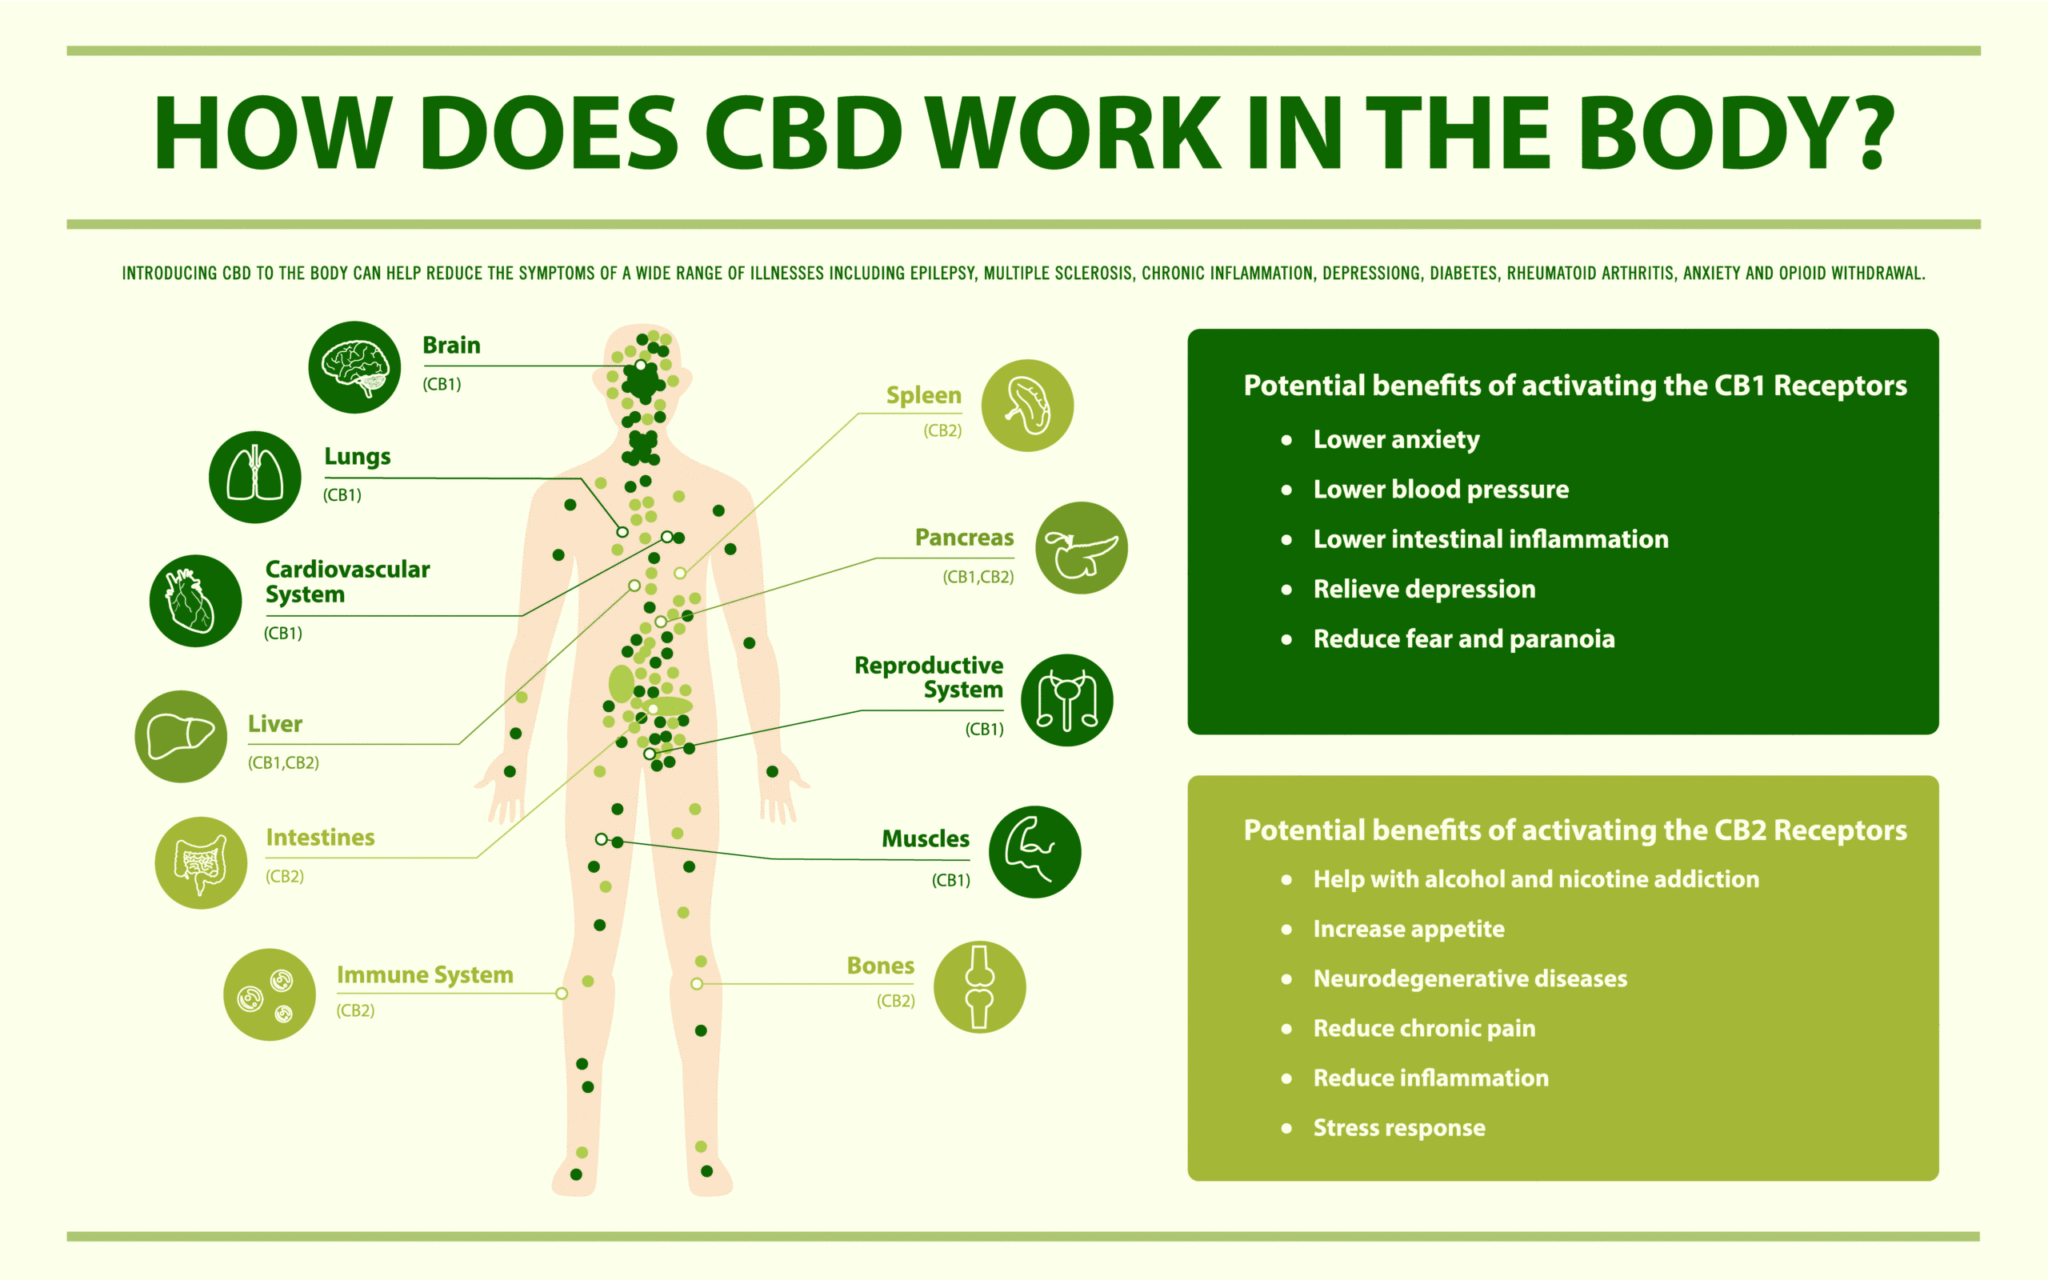 How does CBD work in the Body